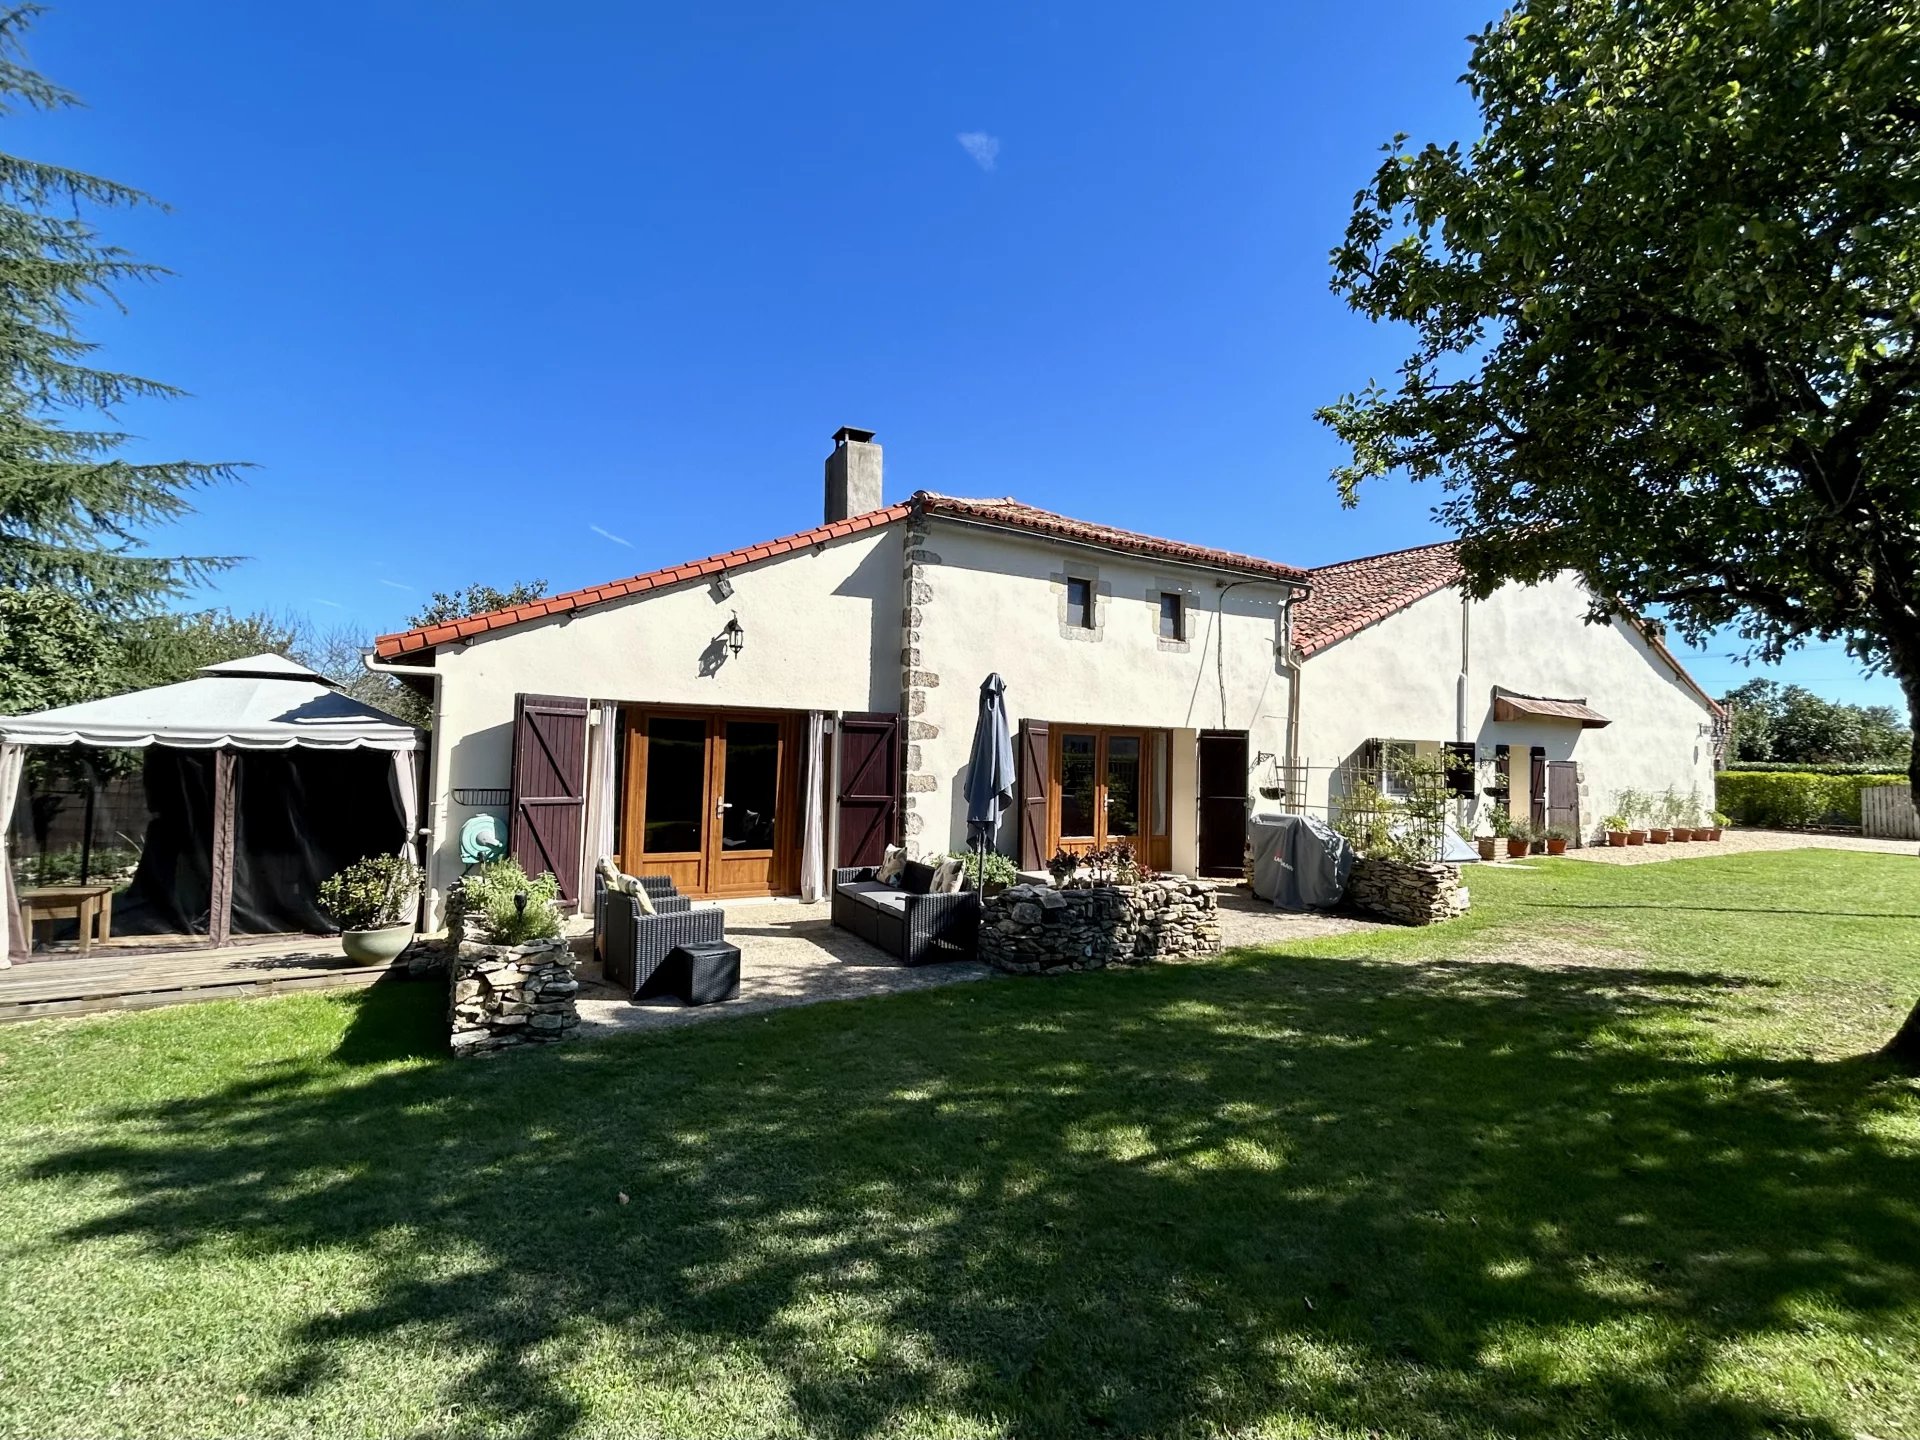 Renovated 3 bed stone farmhouse with lovely gardens and cottage to renovate